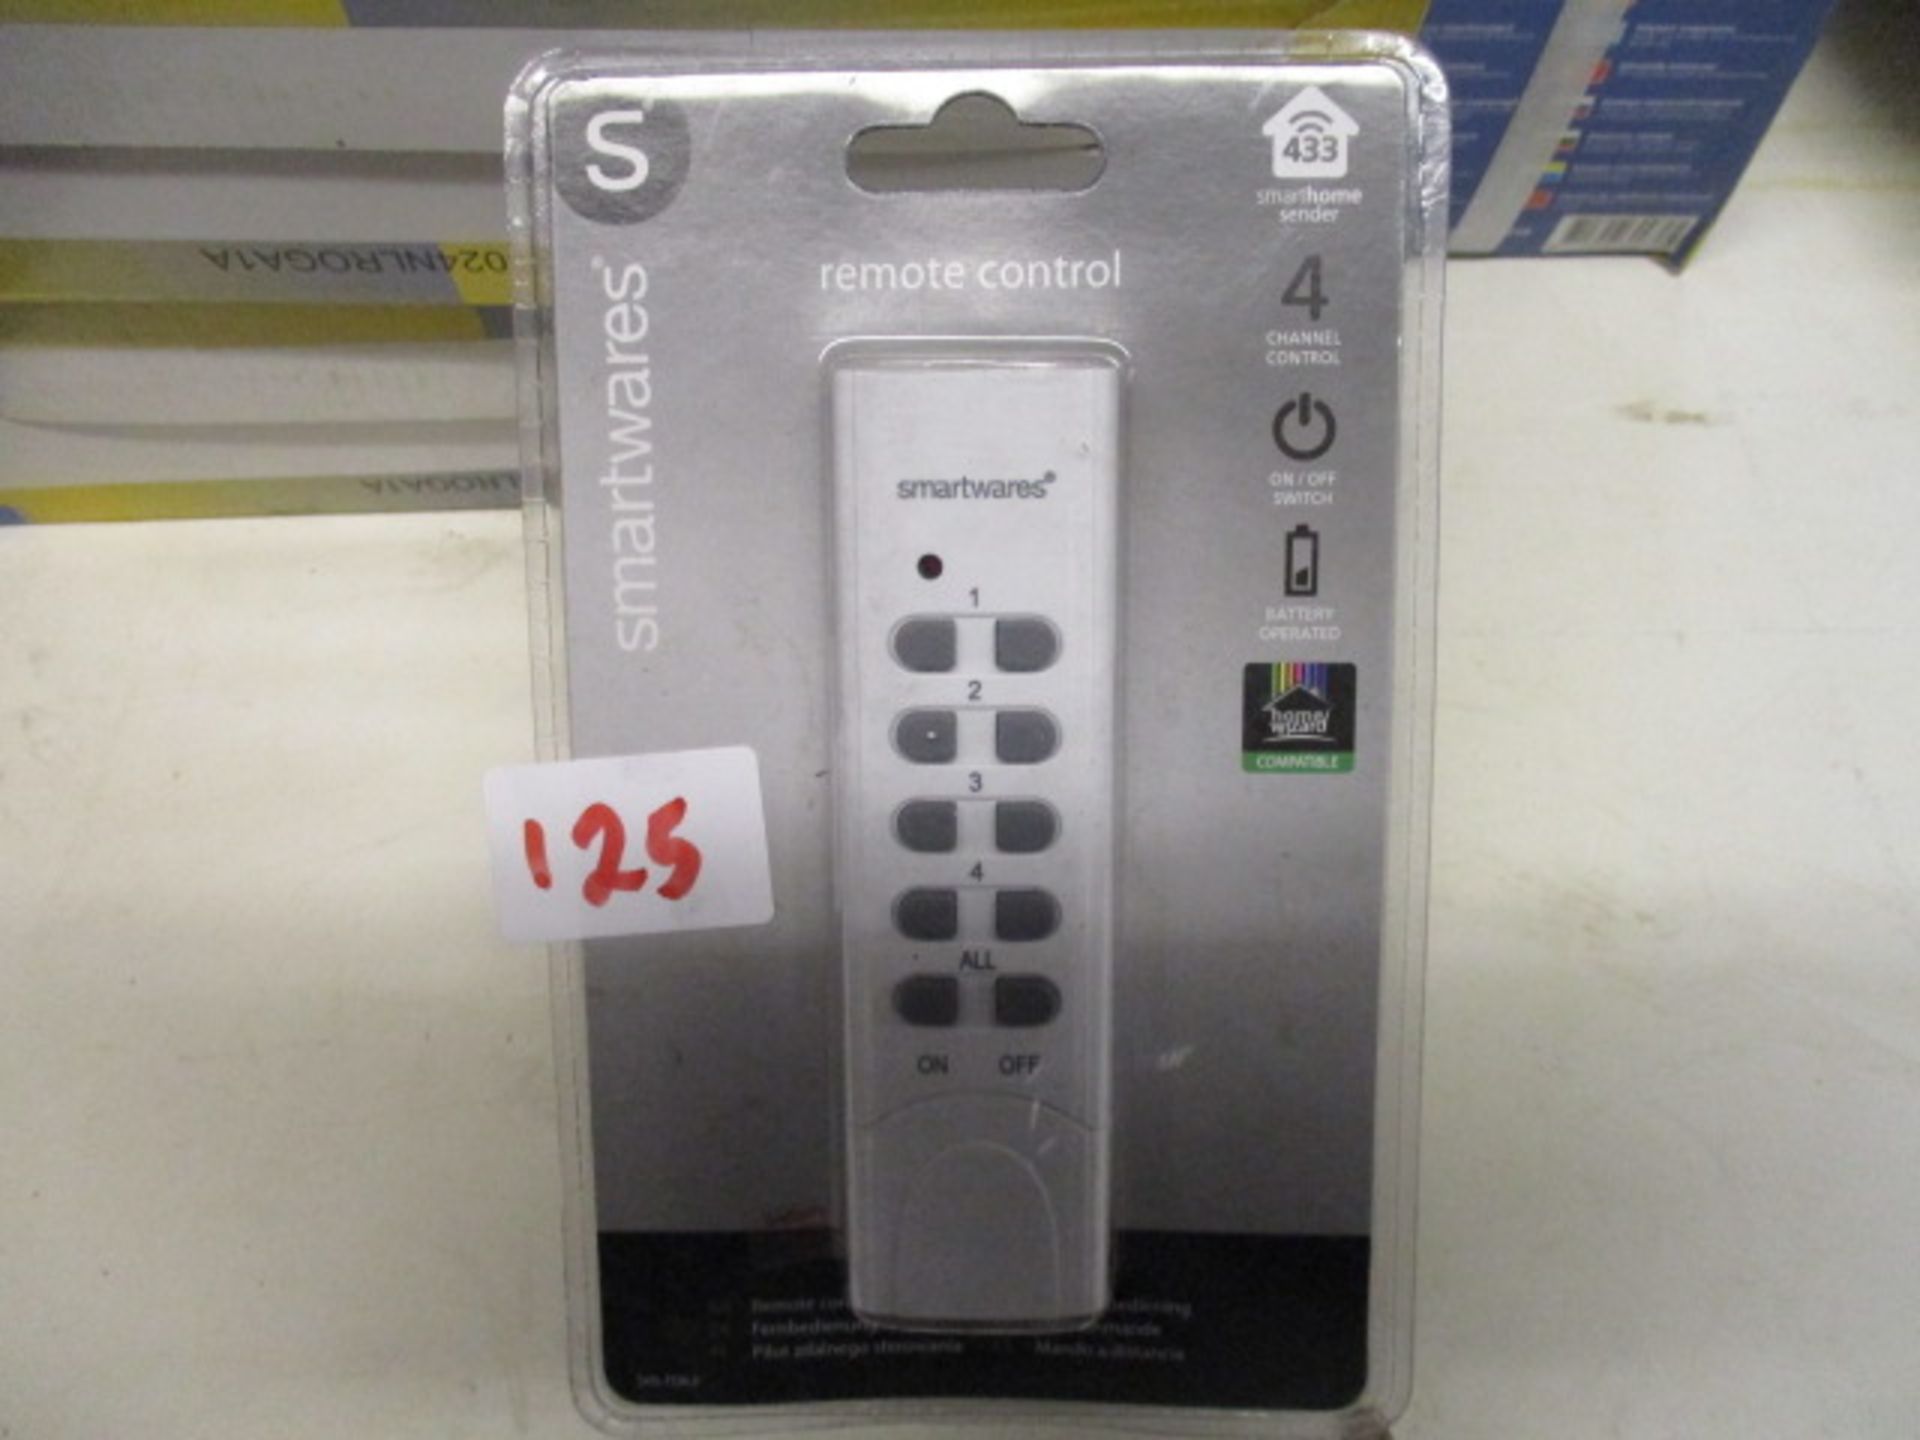 Smartwares 4 channel remote control new and boxed